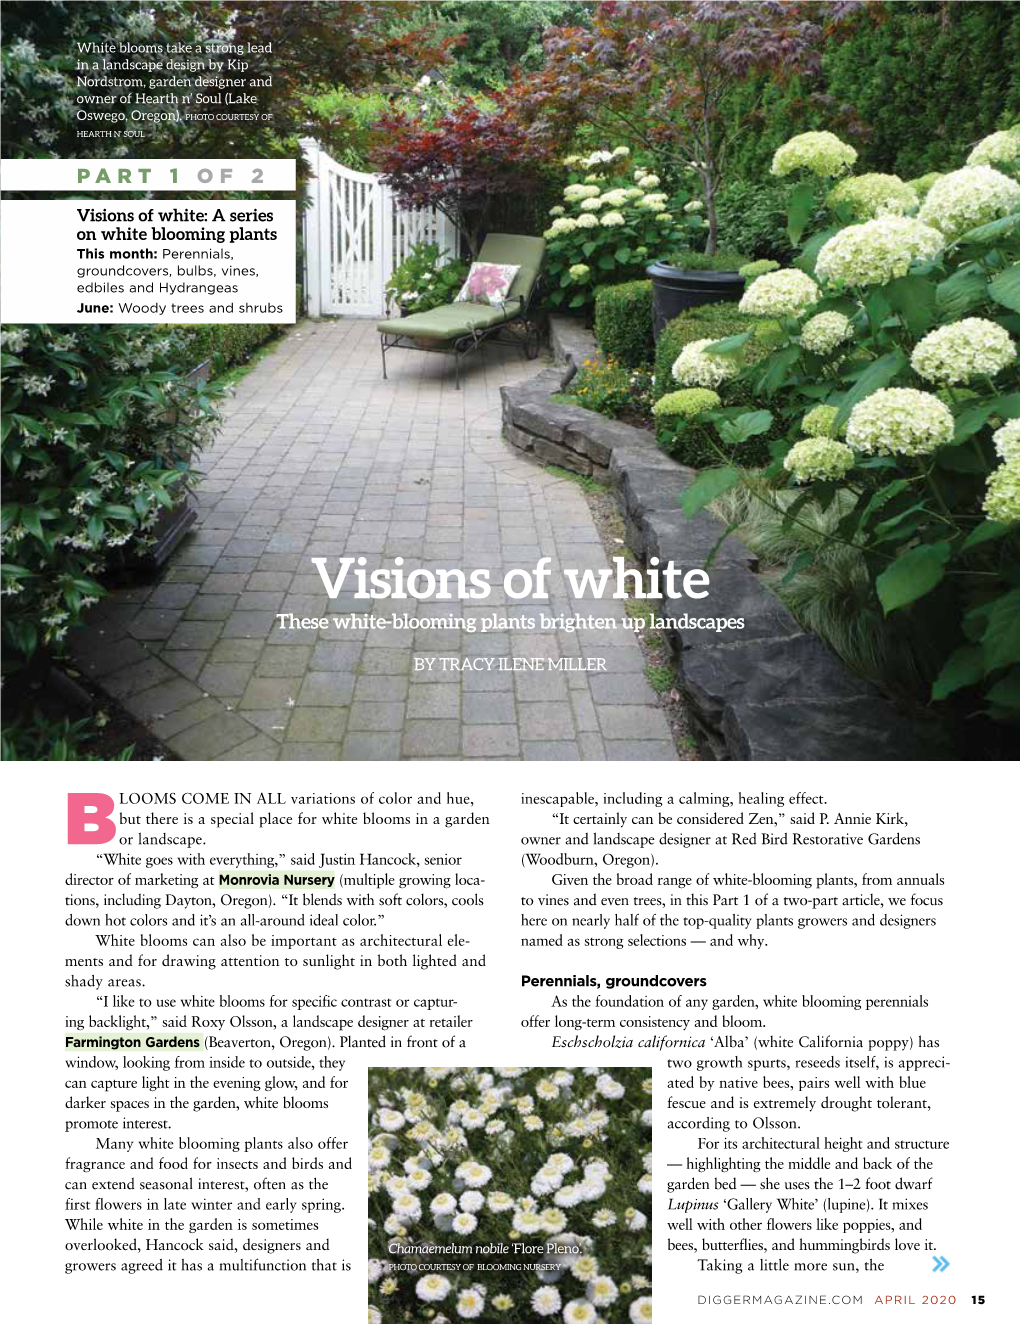 Visions of White: a Series on White Blooming Plants This Month: Perennials, Groundcovers, Bulbs, Vines, Edbiles and Hydrangeas June: Woody Trees and Shrubs